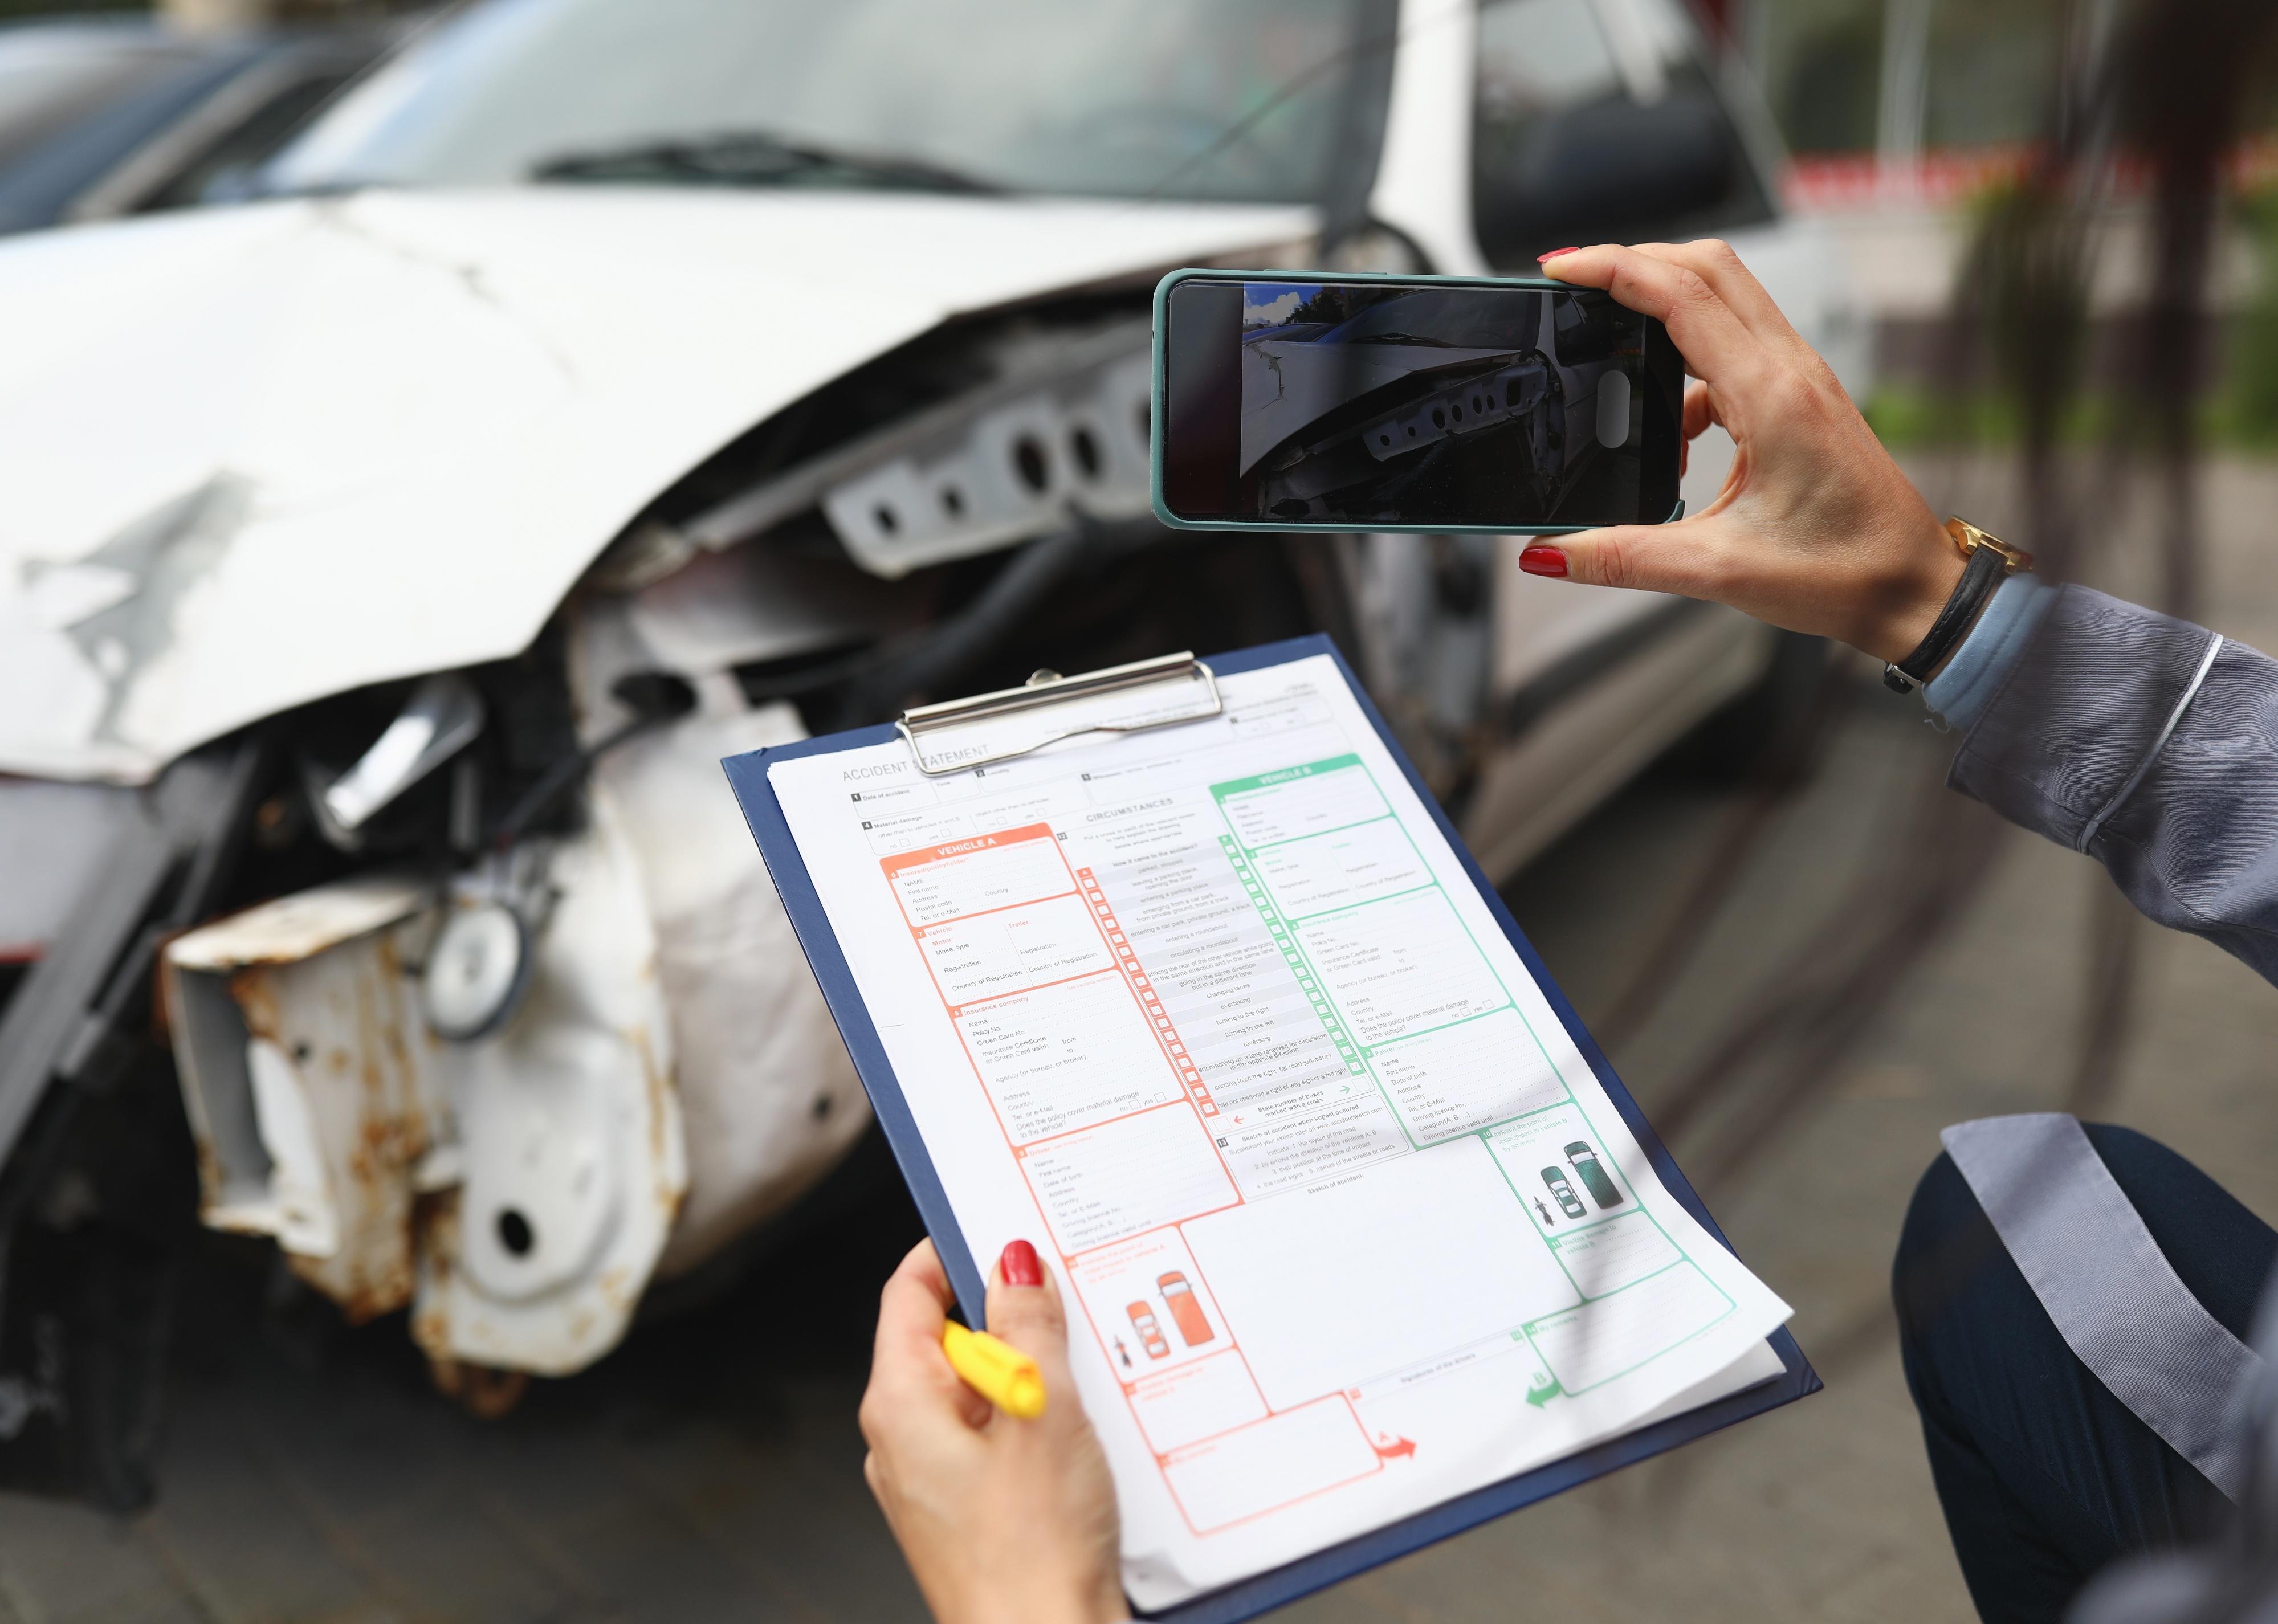 A woman photographs a broken car on a smartphone and holds insurance documents in her hands